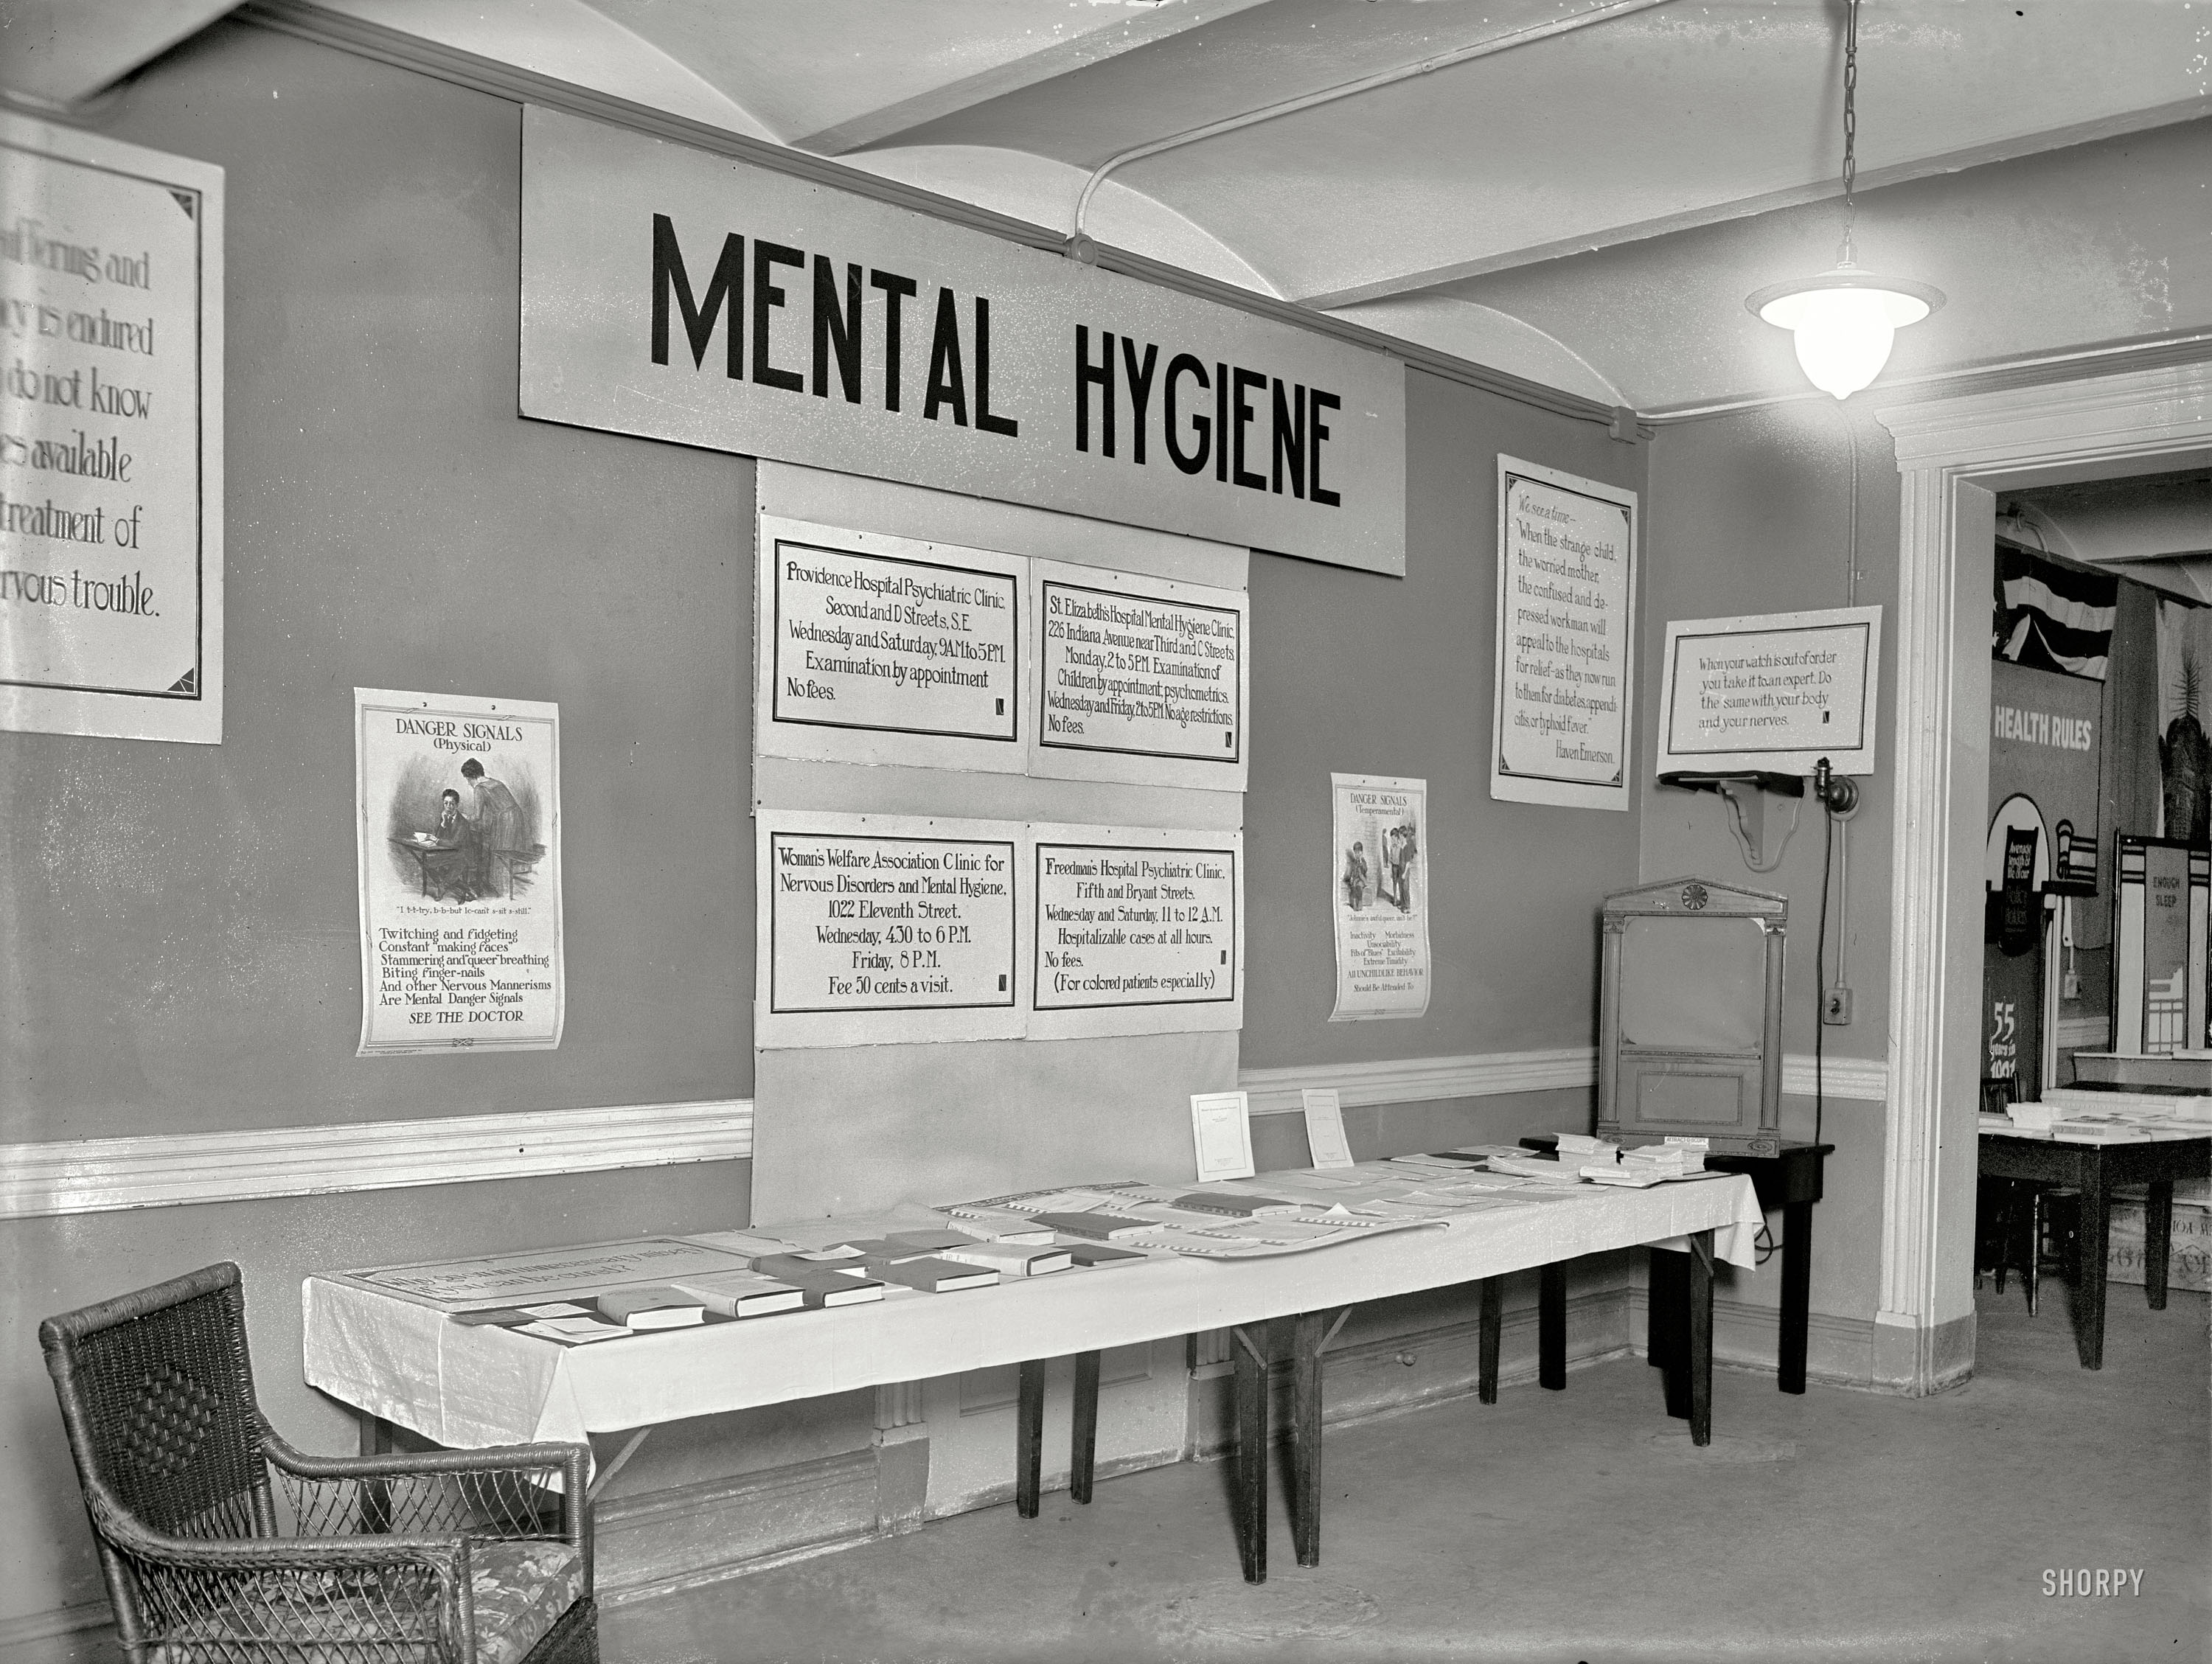 Washington, D.C., 1924. "Exhibit on Mental Hygiene." As we wash our hands, so must we wash our brains. Much poignantly straightforward signage. National Photo Company Collection glass negative. View full size.